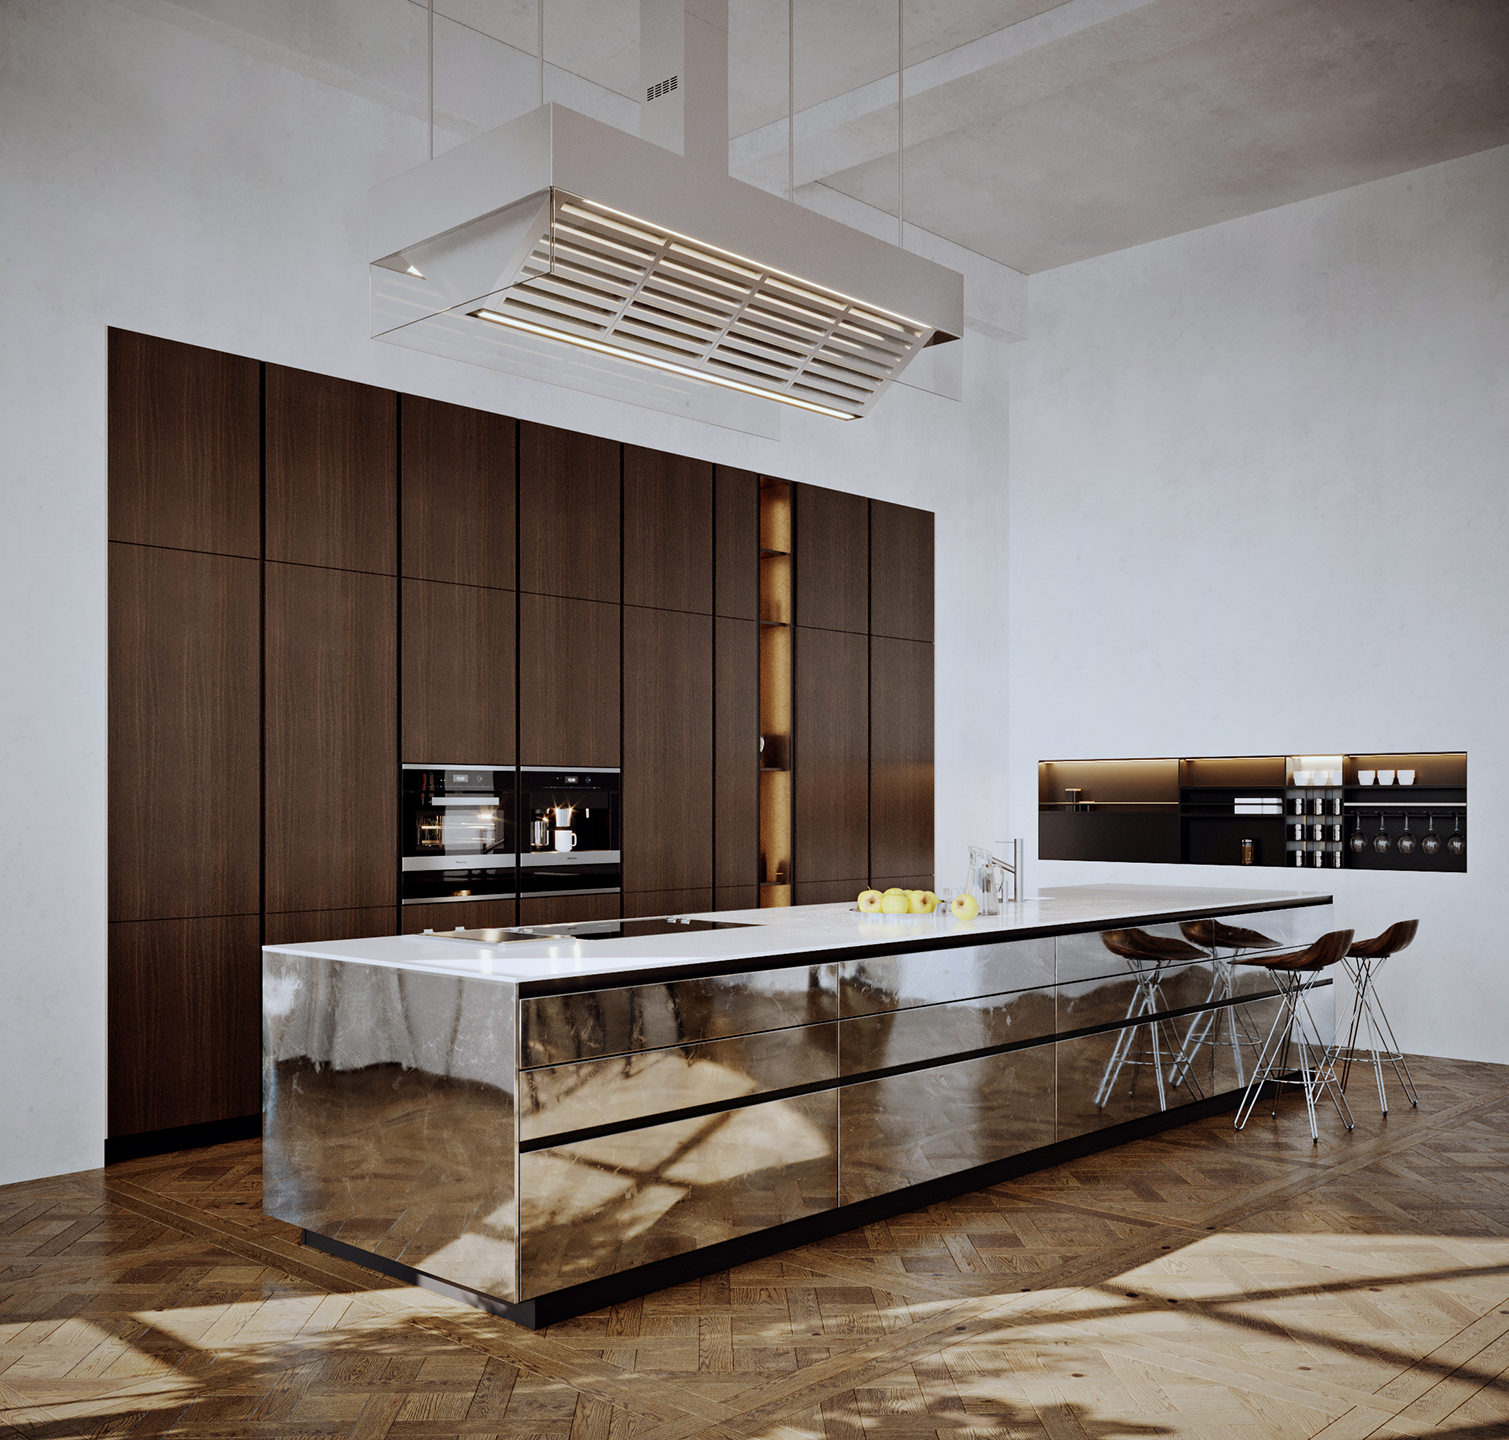 Interior 3D kitchen render with a glossy metal barstand in the cemtre and modern inset appliances